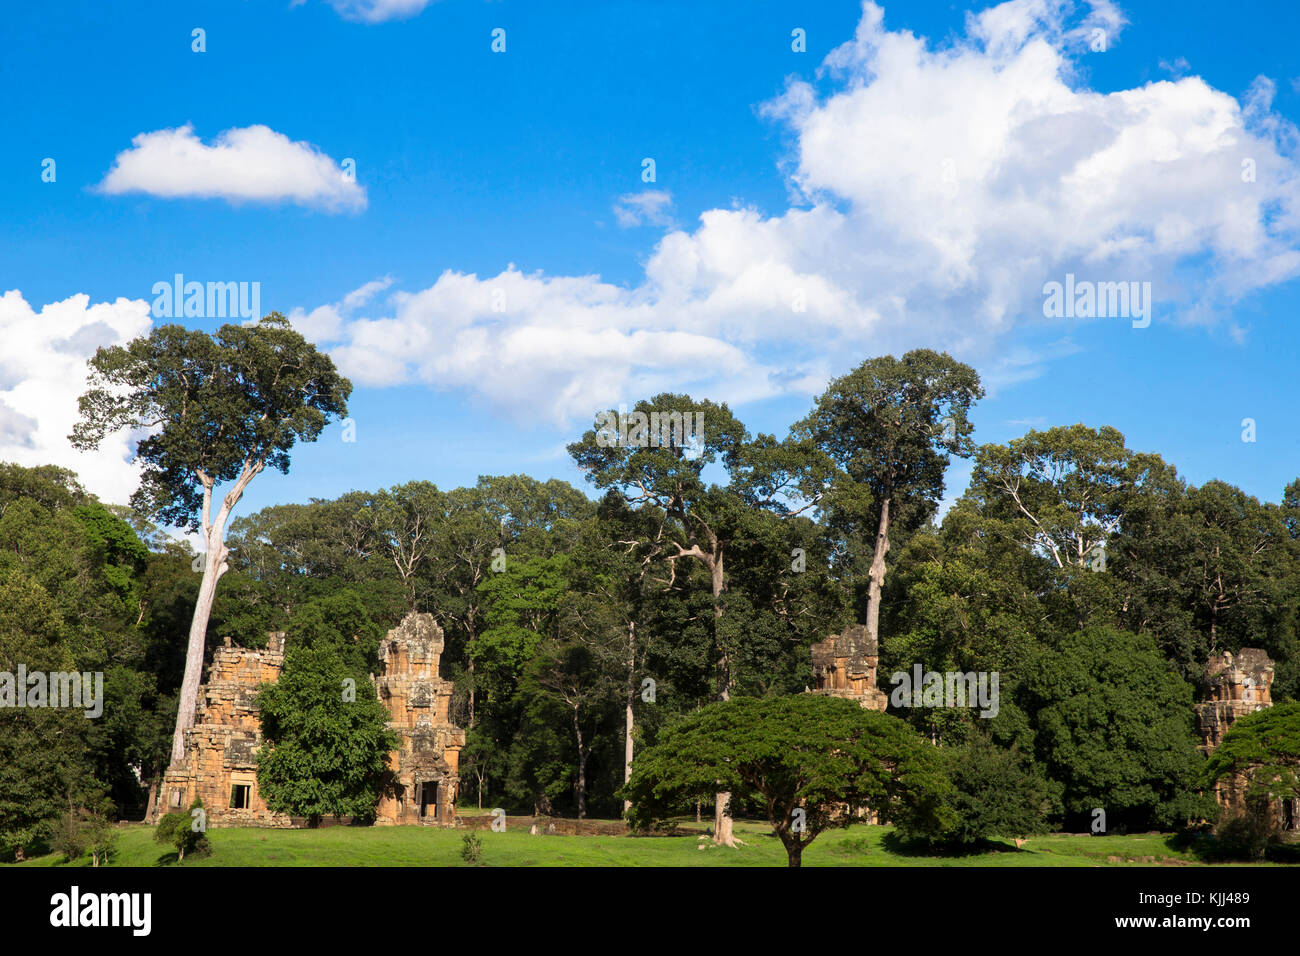 Angkor temple complex. View from the Terrace of the Leper King. Cambodia. Stock Photo